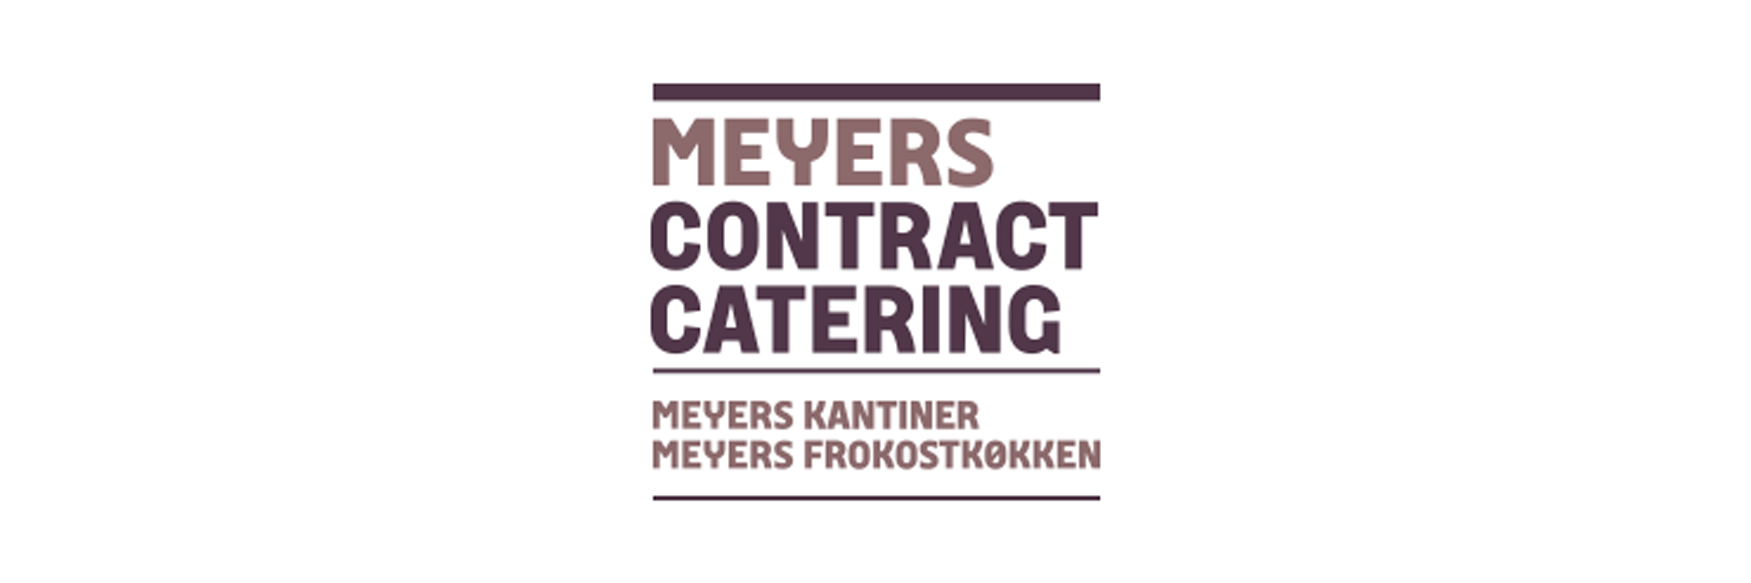 Meyers Contract Catering